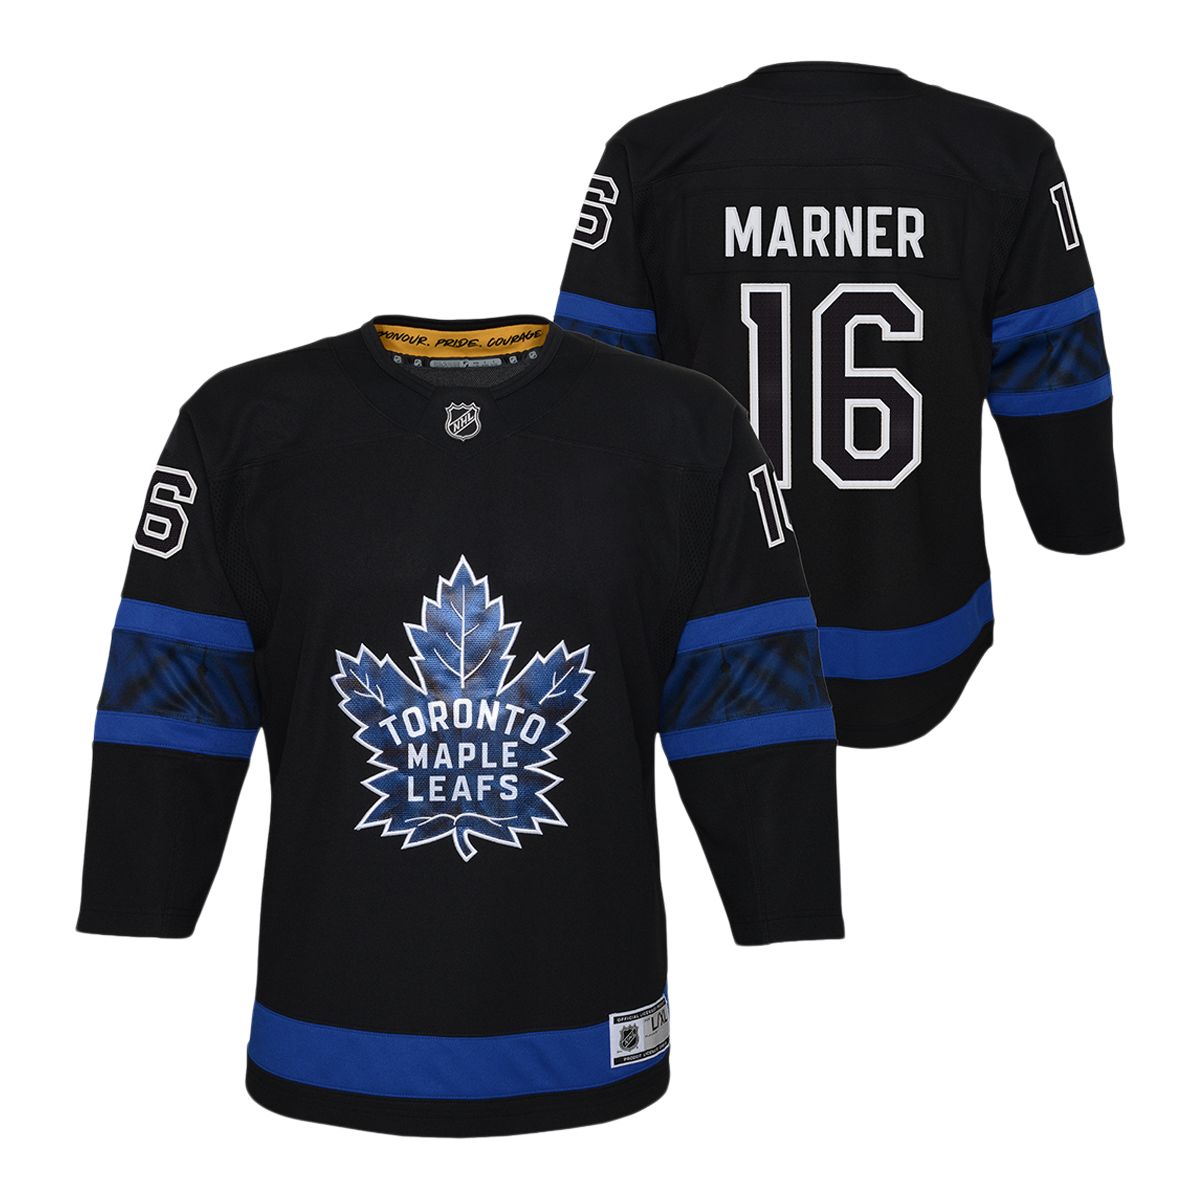 Justin Bieber Maple Leafs Jersey: Where to Buy the New Hockey Sweater